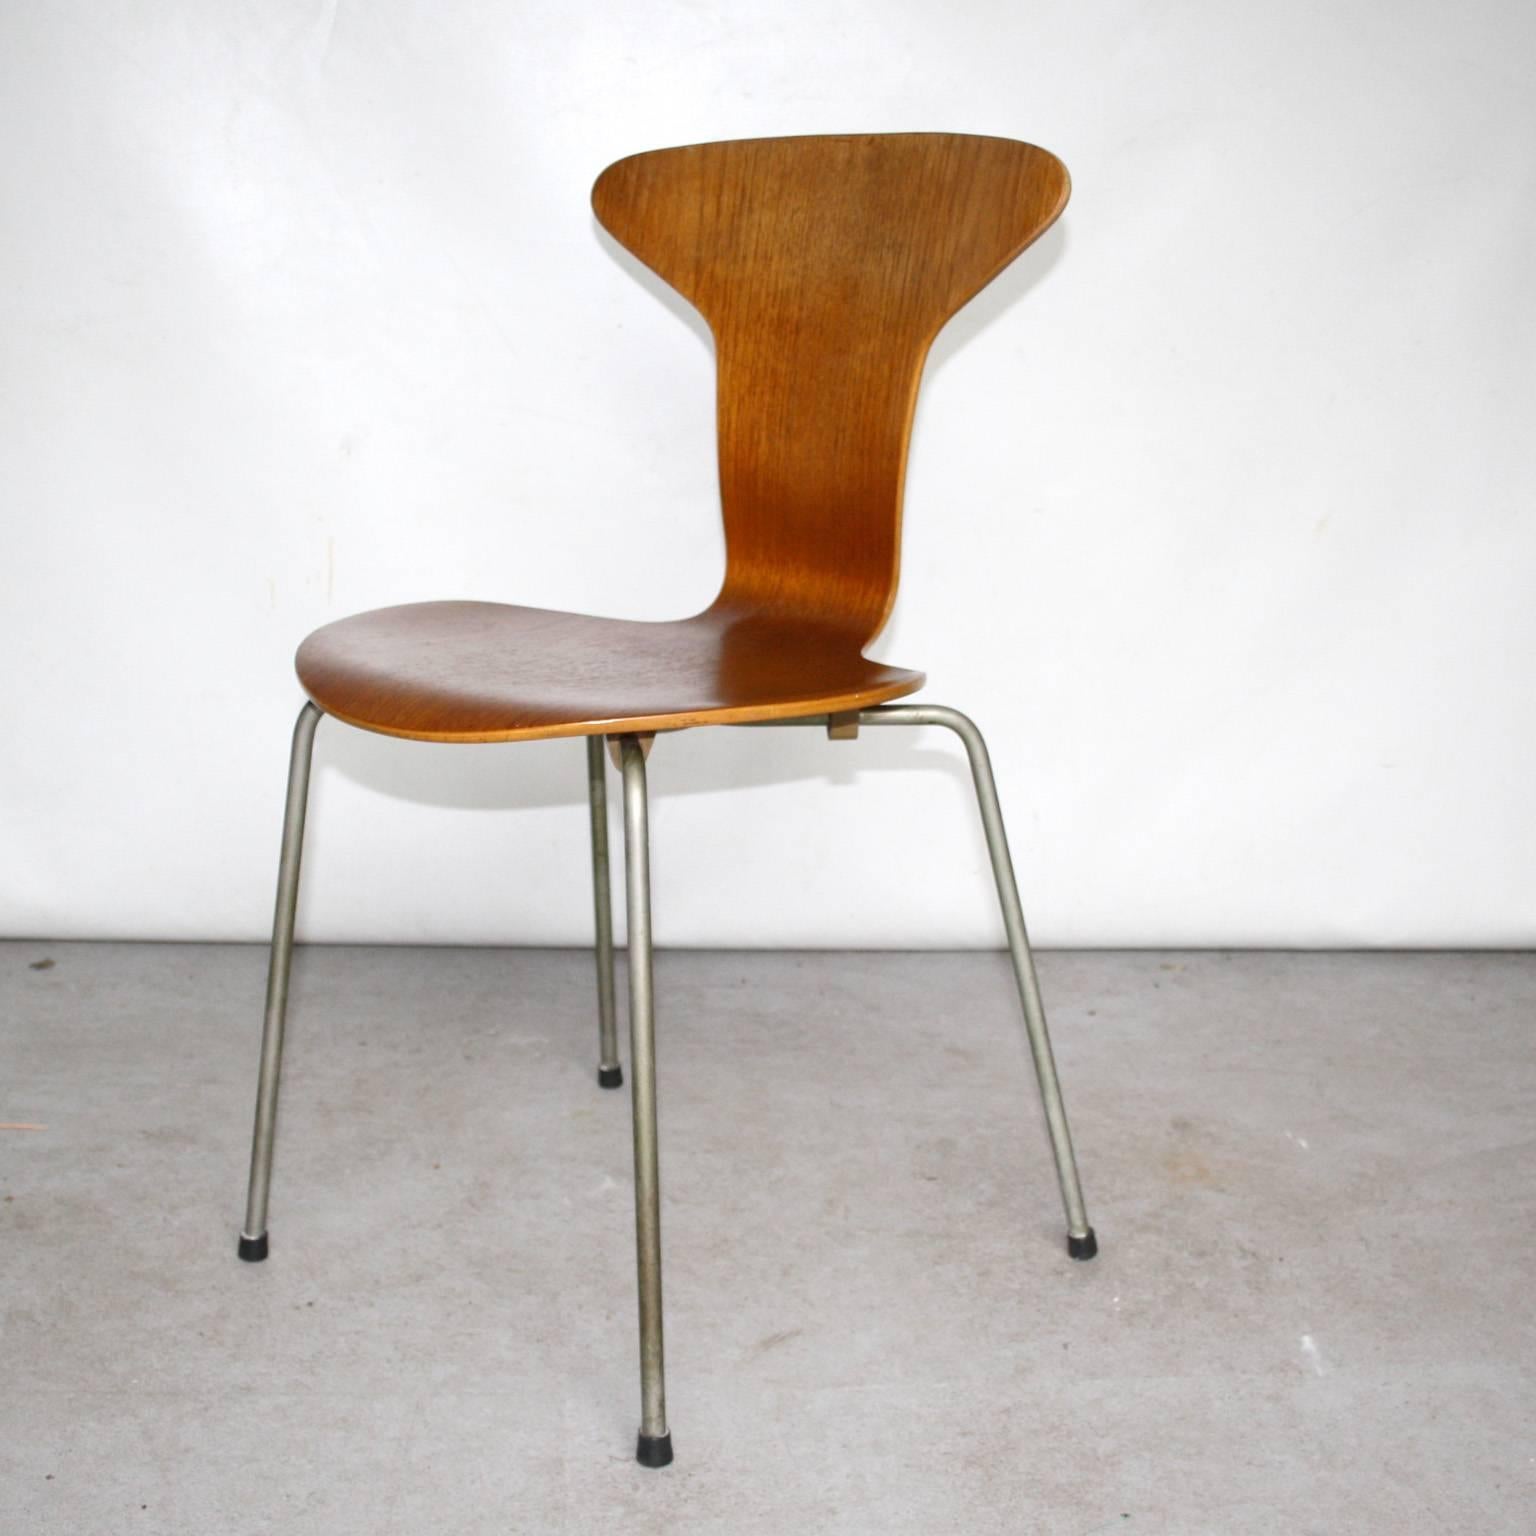 Arne Jacobsen for Fritz Hansen “Mosquito” dining chair.

A beautiful and rare chair from Arne Jacobson. This is an early production with the metal bottom cap. Chair is in good condition.

Measures: Height 77 cm, seating 44 cm.
Width 40.5